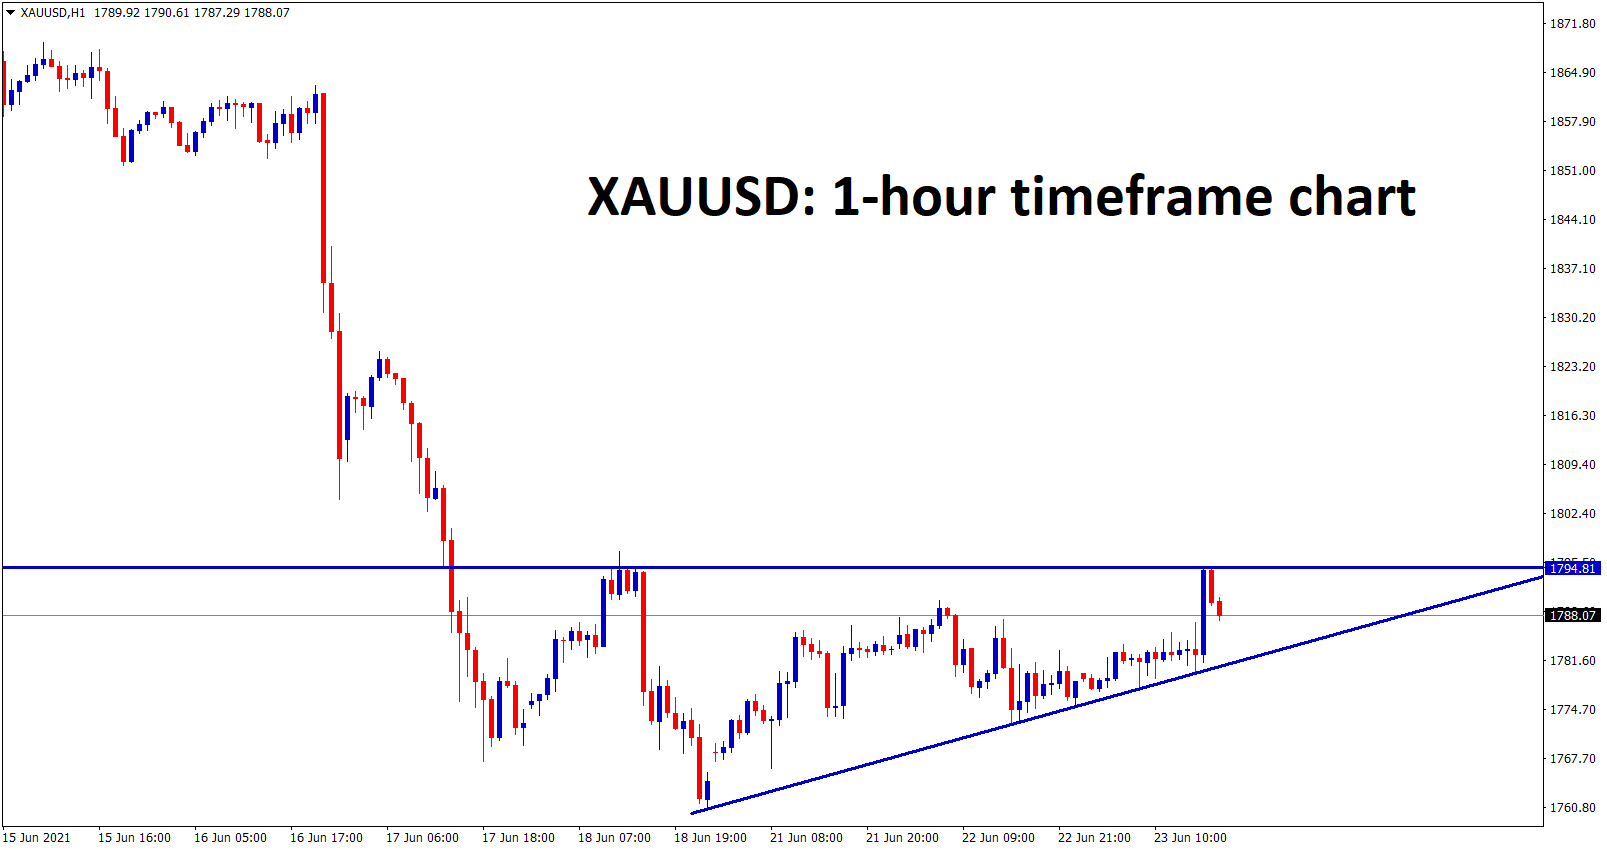 Gold has formed an Ascending Triangle pattern